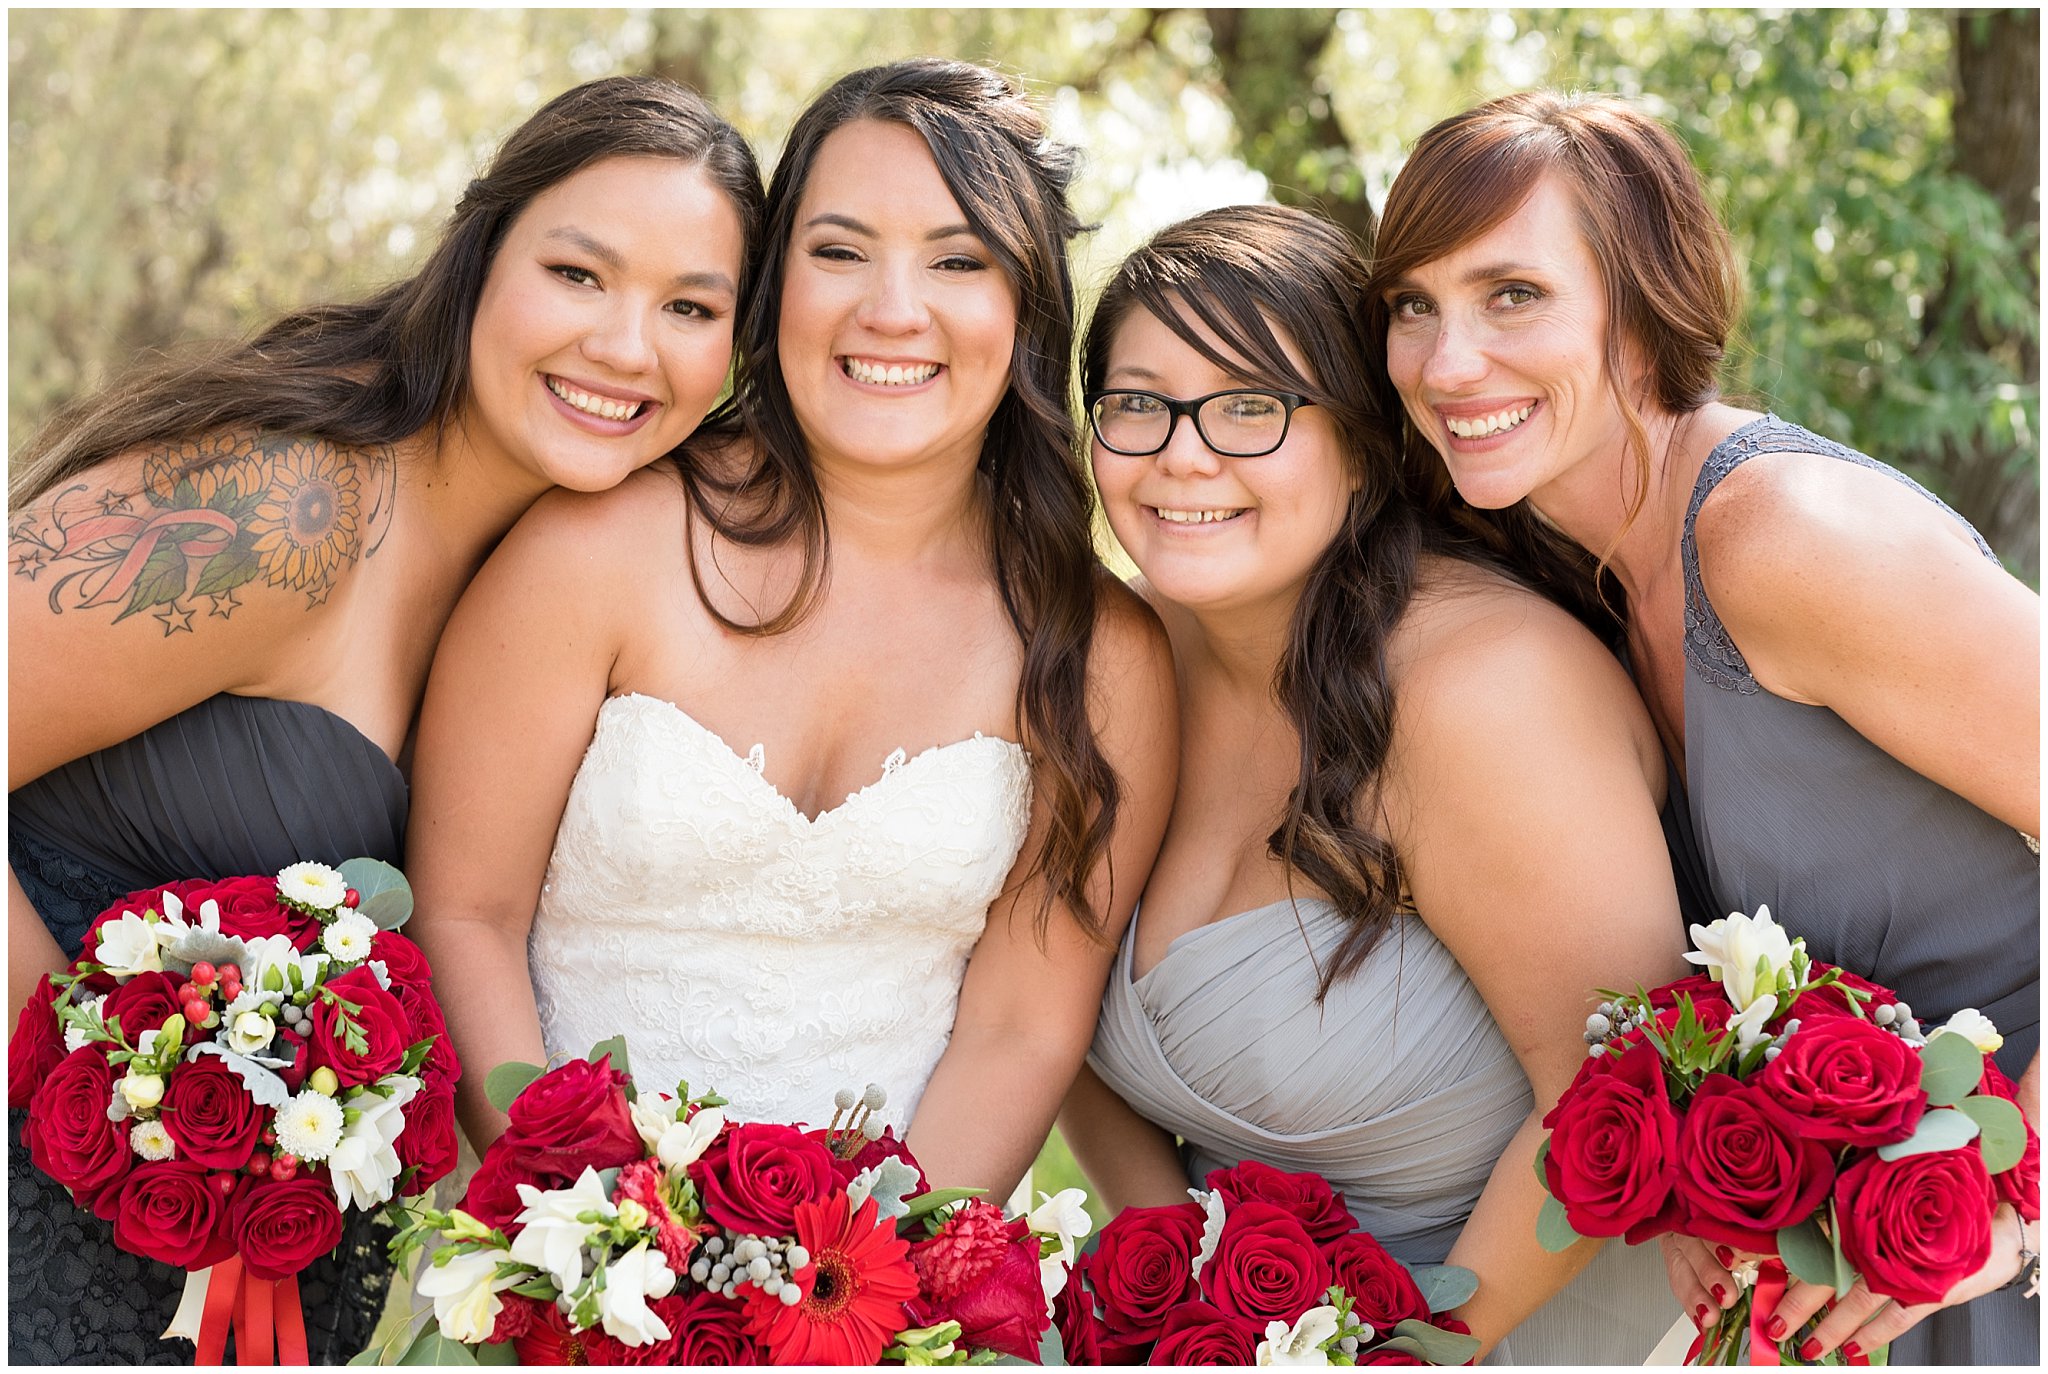 Red and white outdoor wedding | Bride and bridesmaids happy and smiling | Davis County Outdoor Wedding | Jessie and Dallin Photography